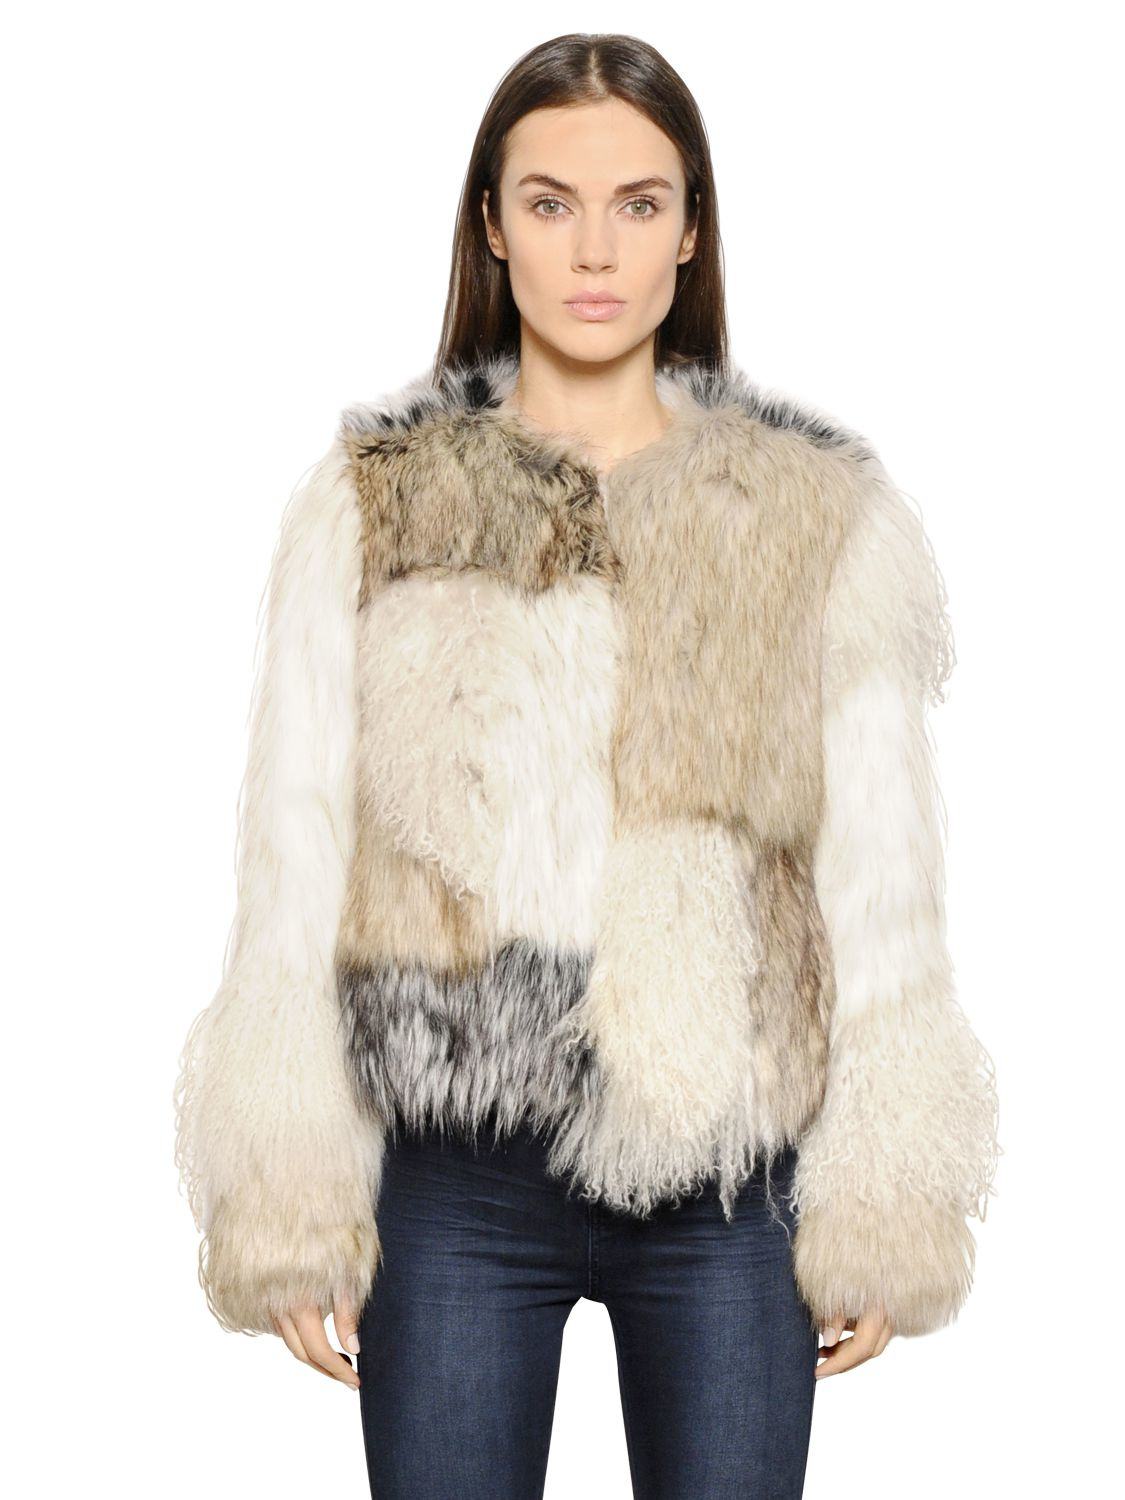 Lyst - Urbancode Patchwork Faux Fur Short Jacket in Gray